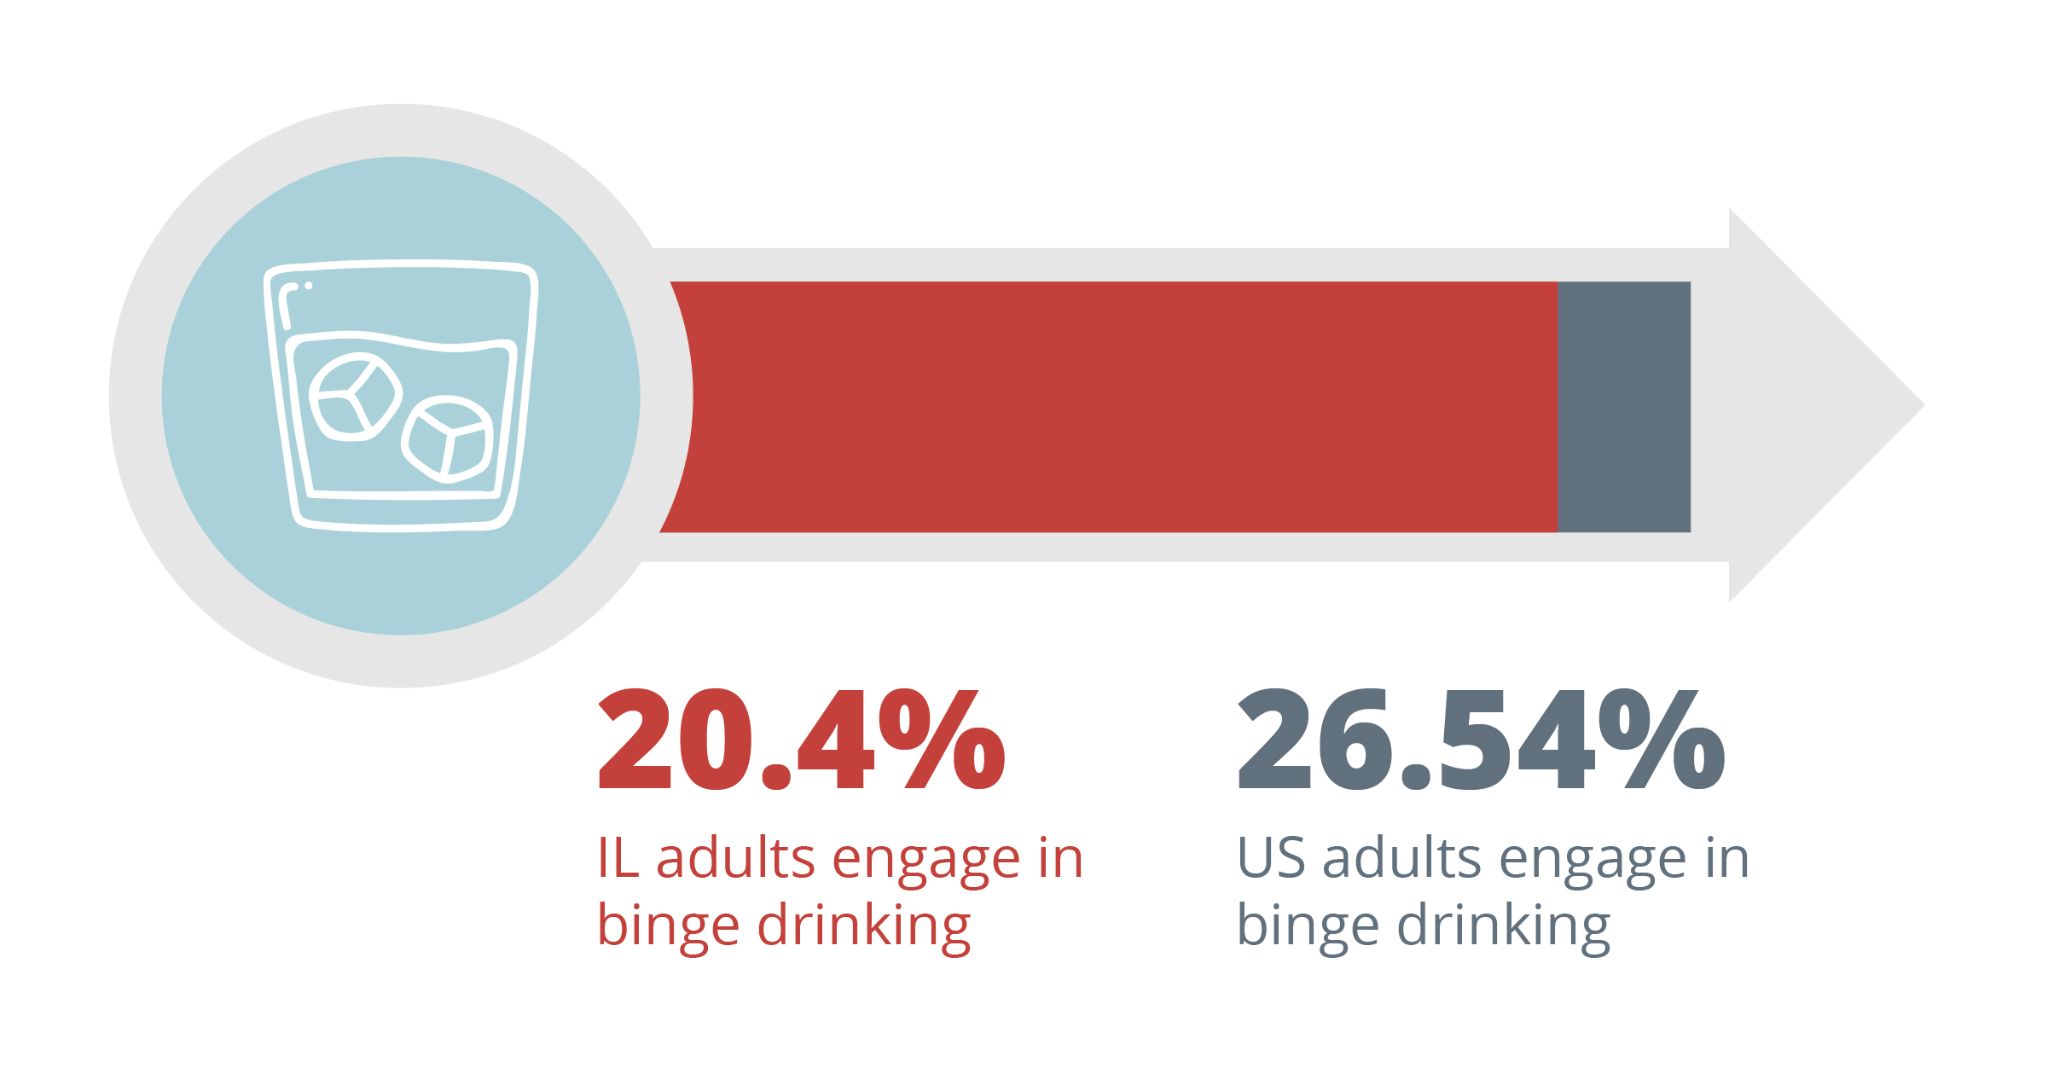 20.4% of illinois adults engage in binge drinking. 26.54% of American adults engage in binge drinking. Drug And Alcohol Detox & Rehab, Addiction Treatment Resources in Decatur Illinois